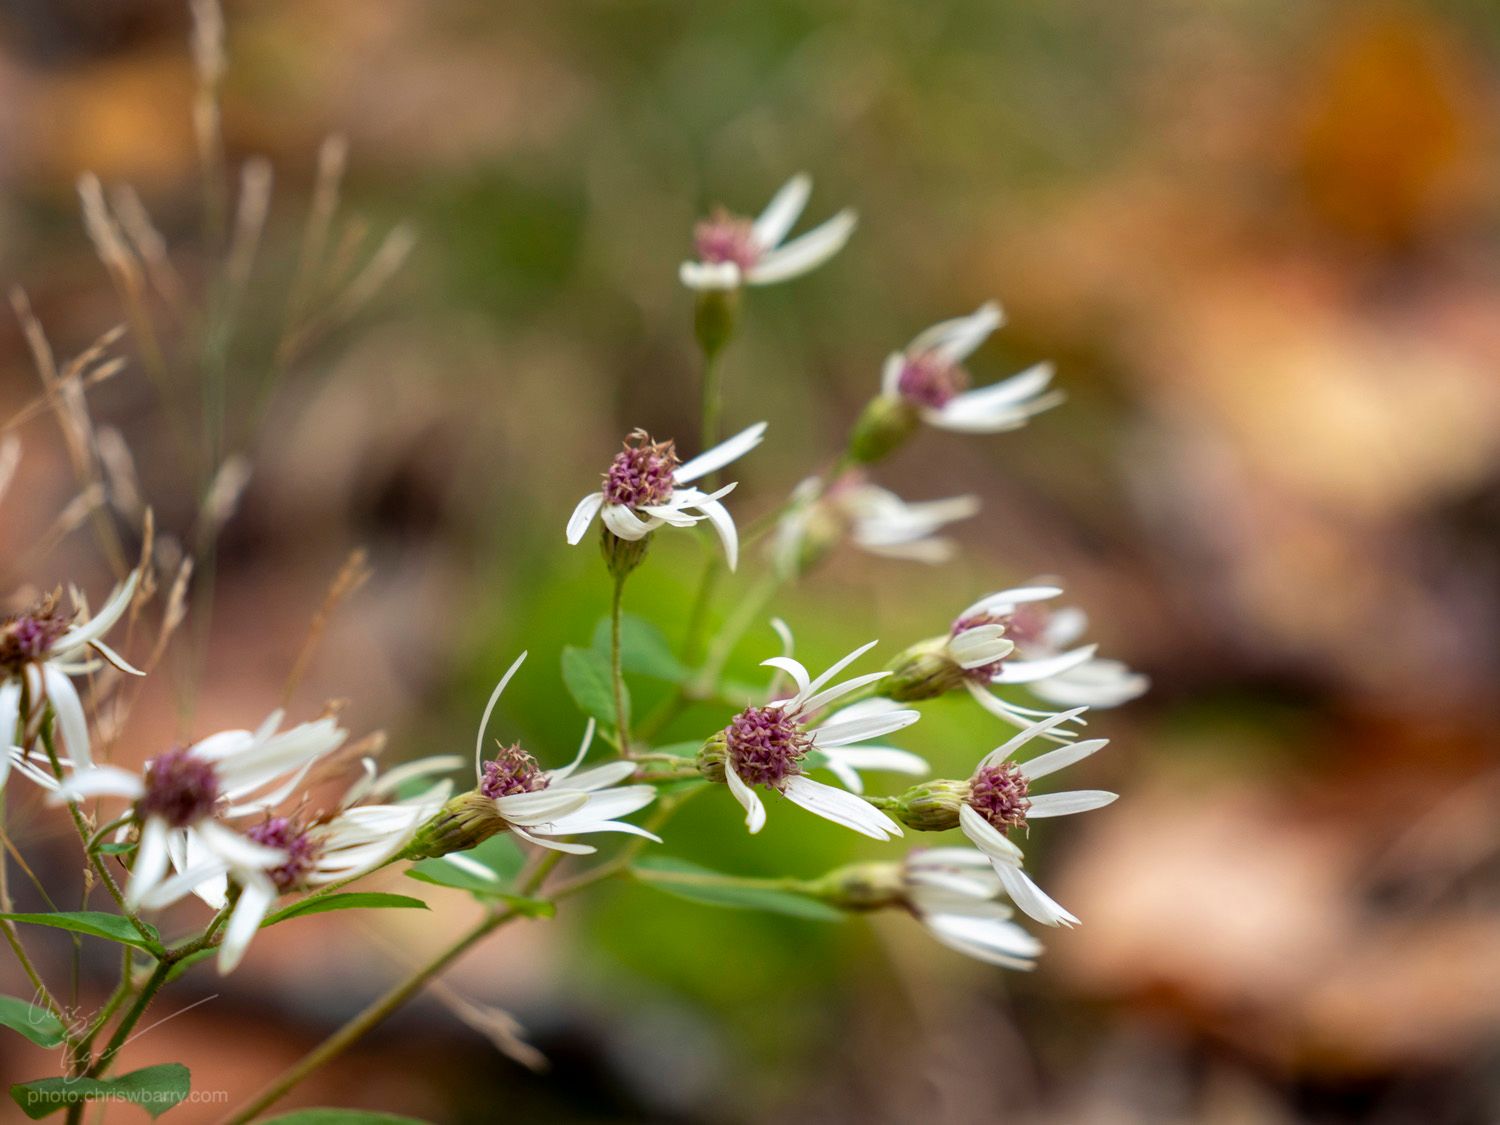 White aster flowers, many of them missing a few petals. The rest of the image is out of focus